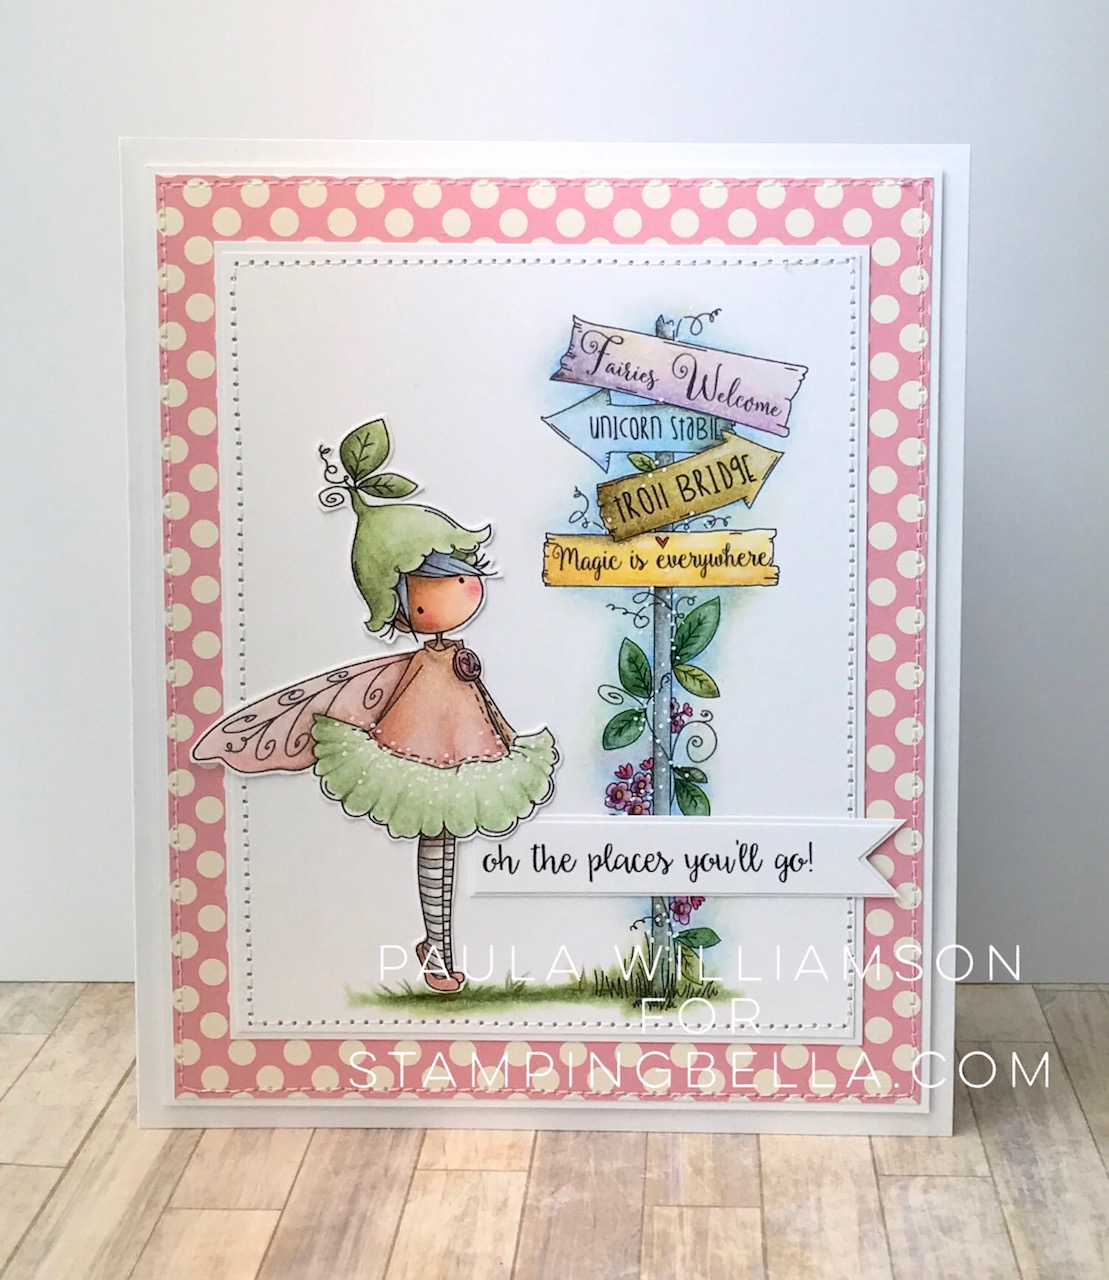 Stamping Bella SUMMER 2017 RELEASE- RUBBER STAMP : TINY TOWNIE fairy garden fairy and fairy signT. Card by Paula Williamson